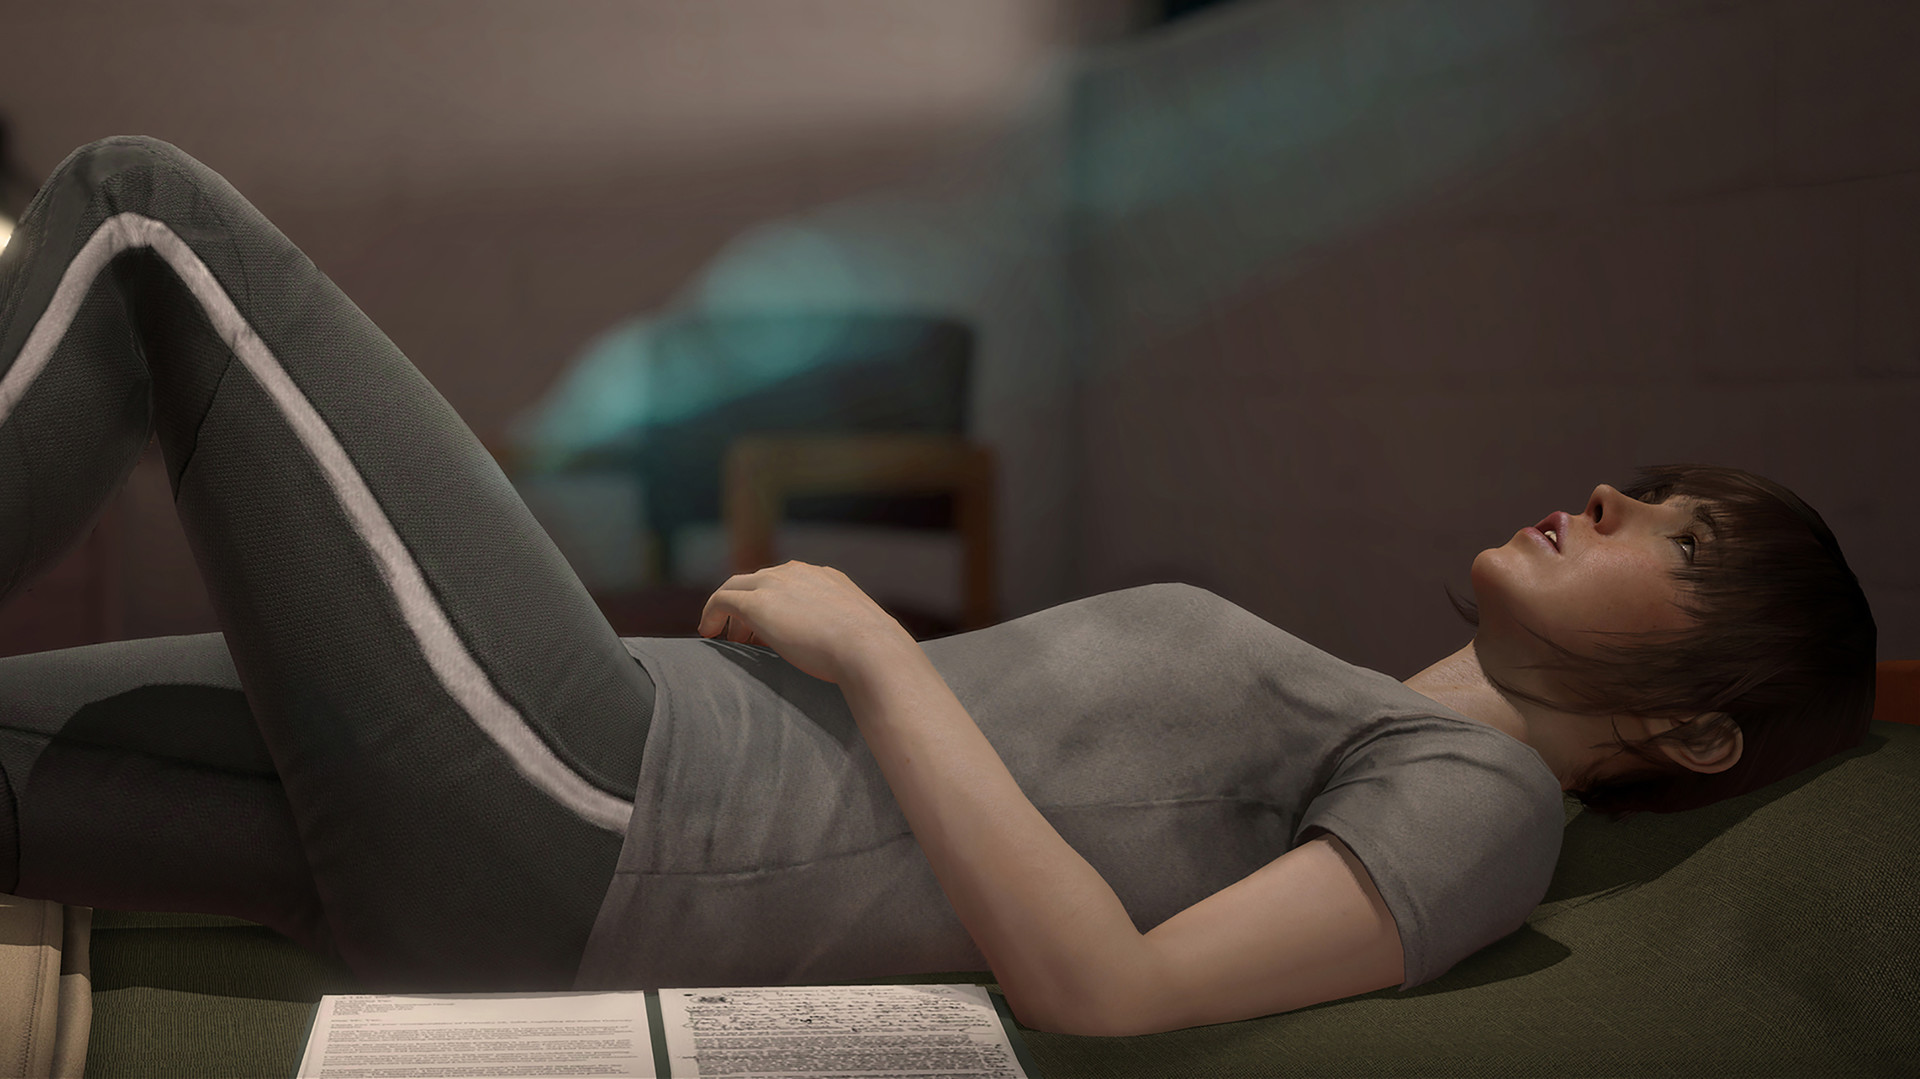 Beyond: Two Souls Images 